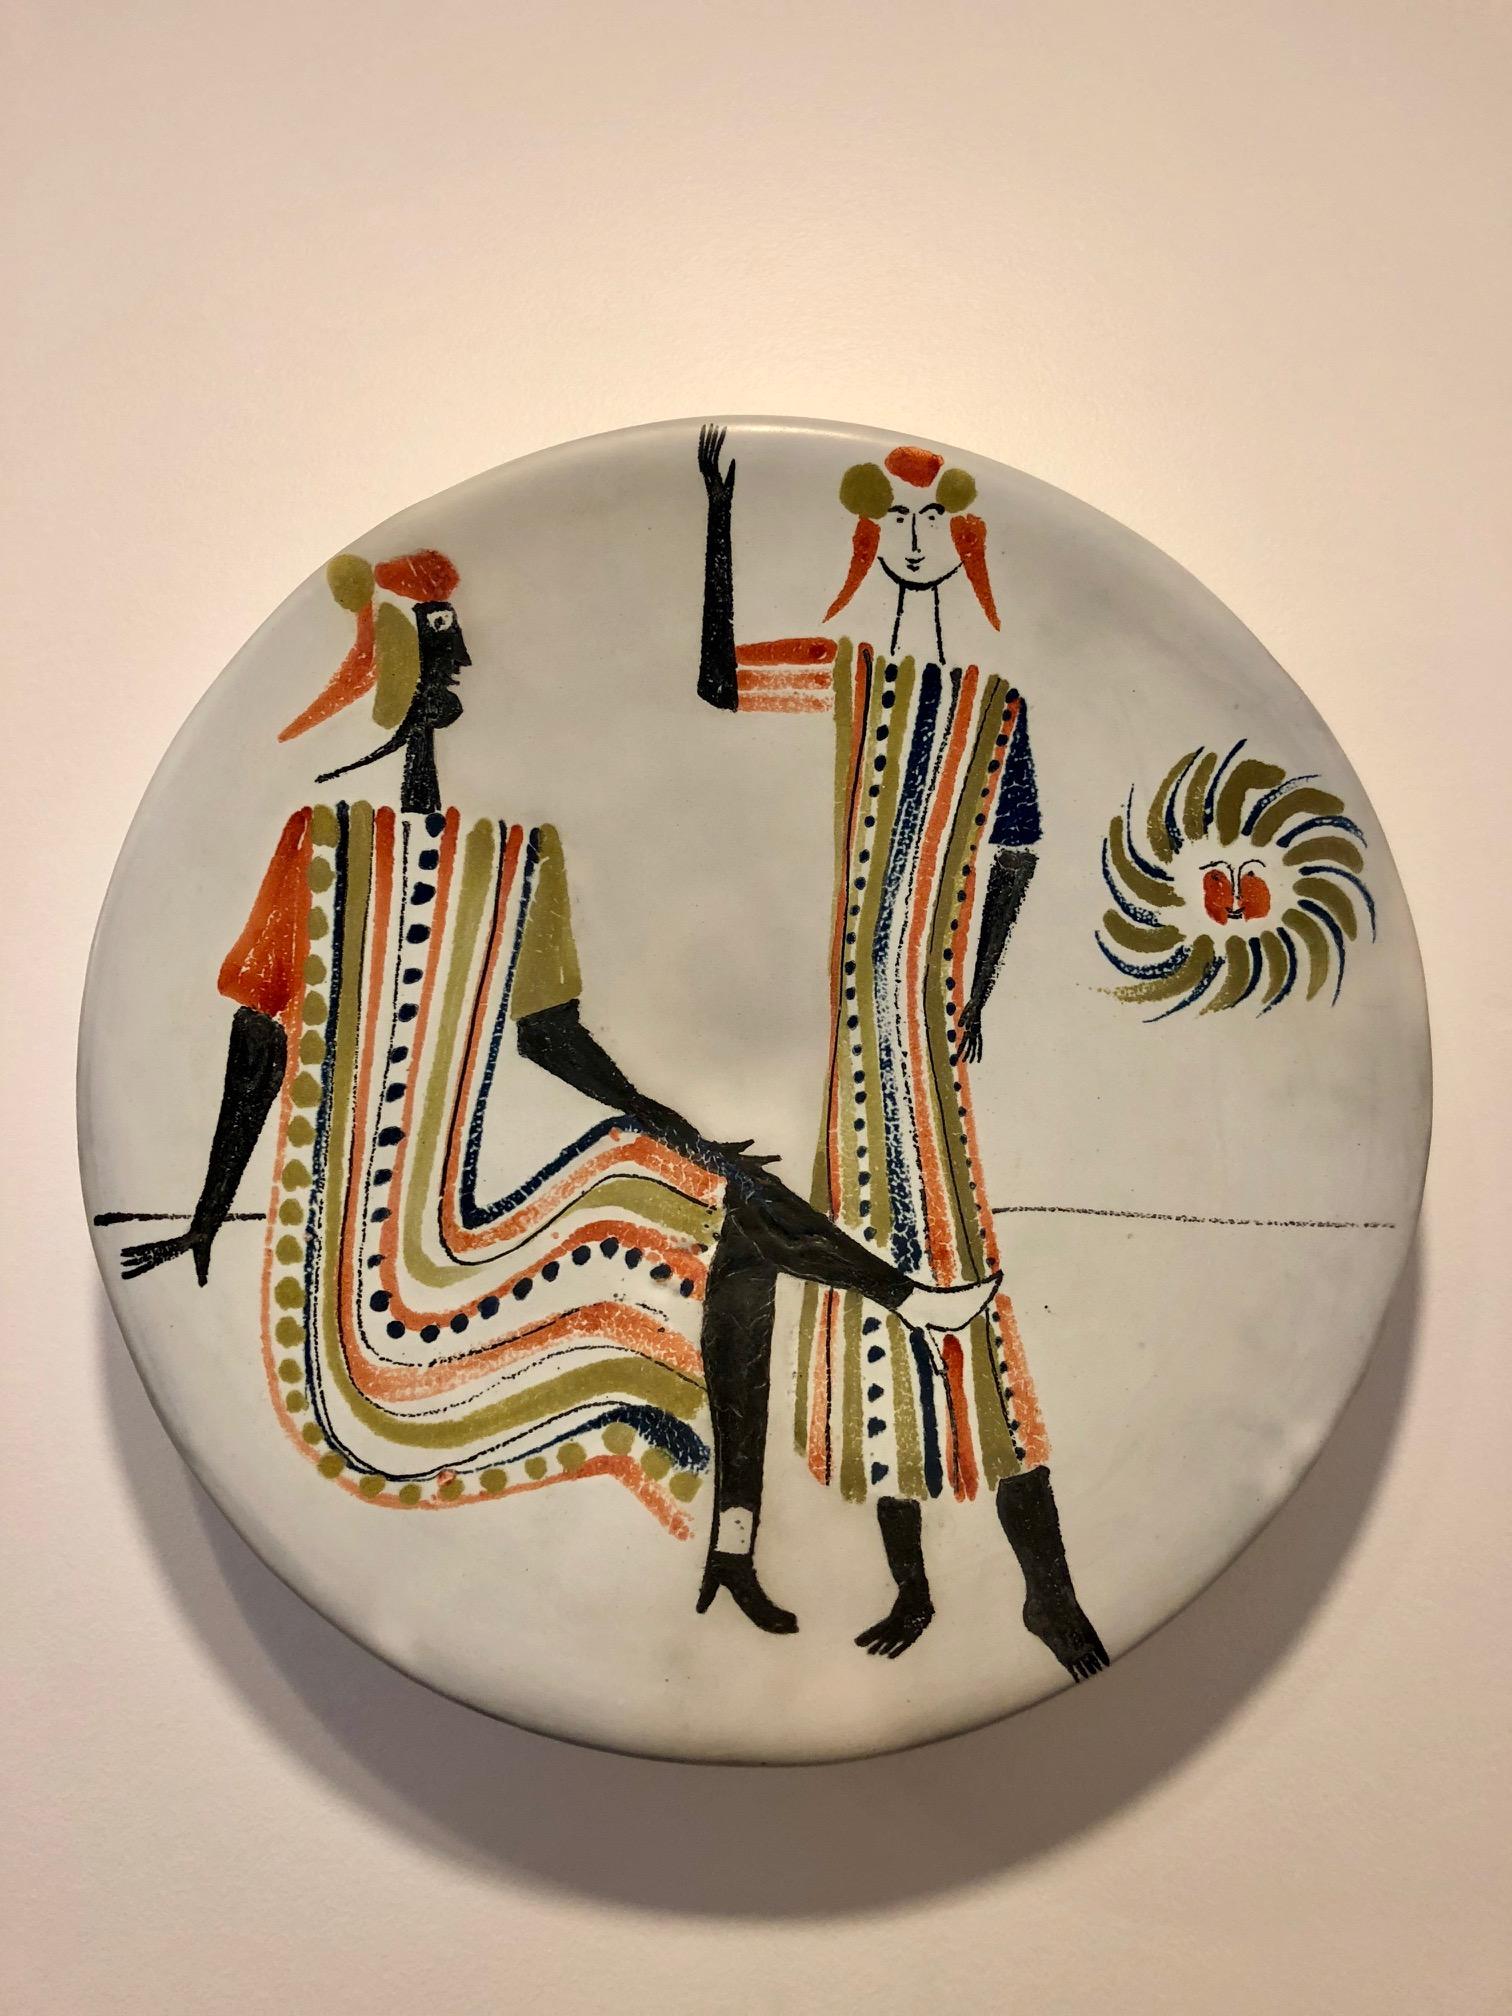 Roger Capron (1922-2006)
Large plate, faience tin glaze, paraffin reserve and polychrome decoration with ancient figures, 1955
Measures: Diameter 39 cm. Signed Capron Vallauris.